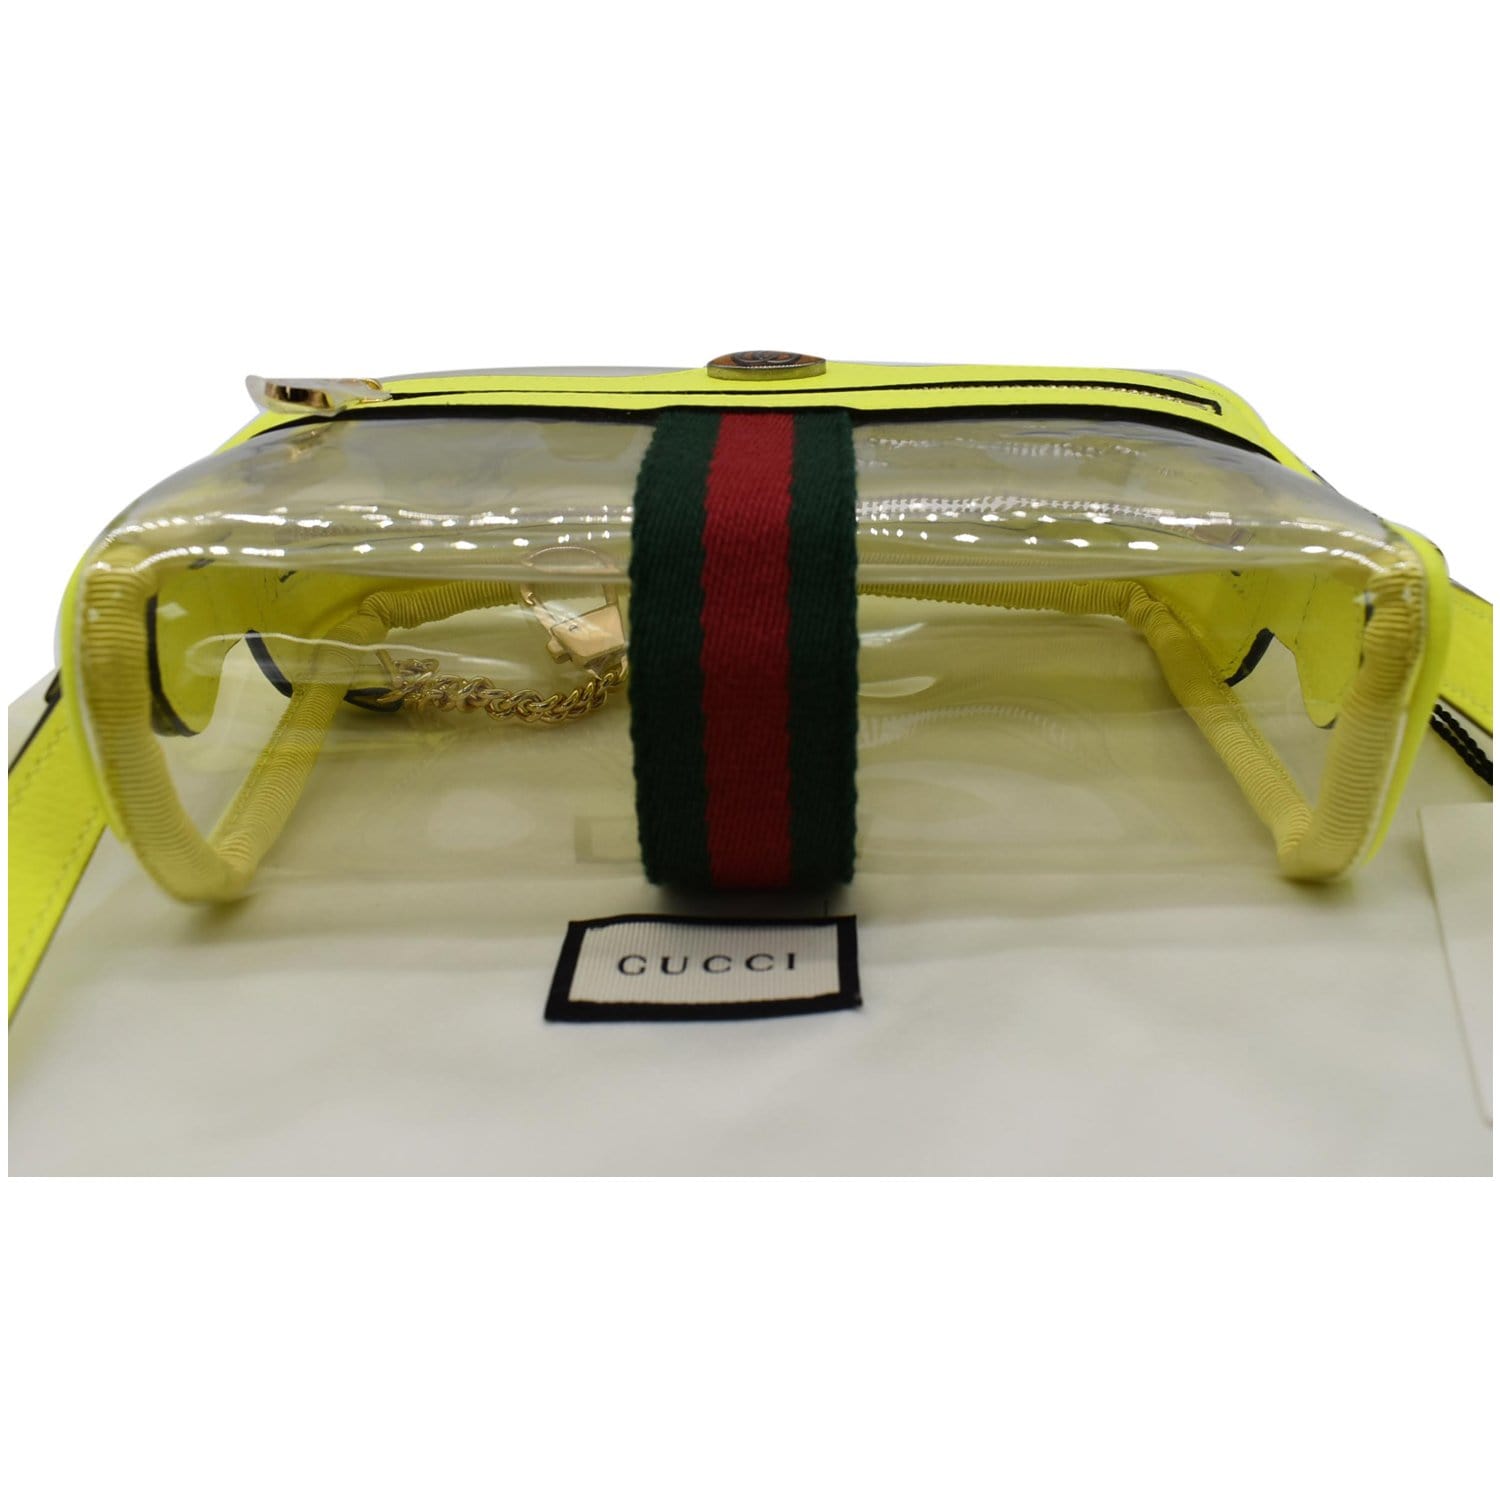 Gucci Clear Bags & Handbags for Women, Authenticity Guaranteed